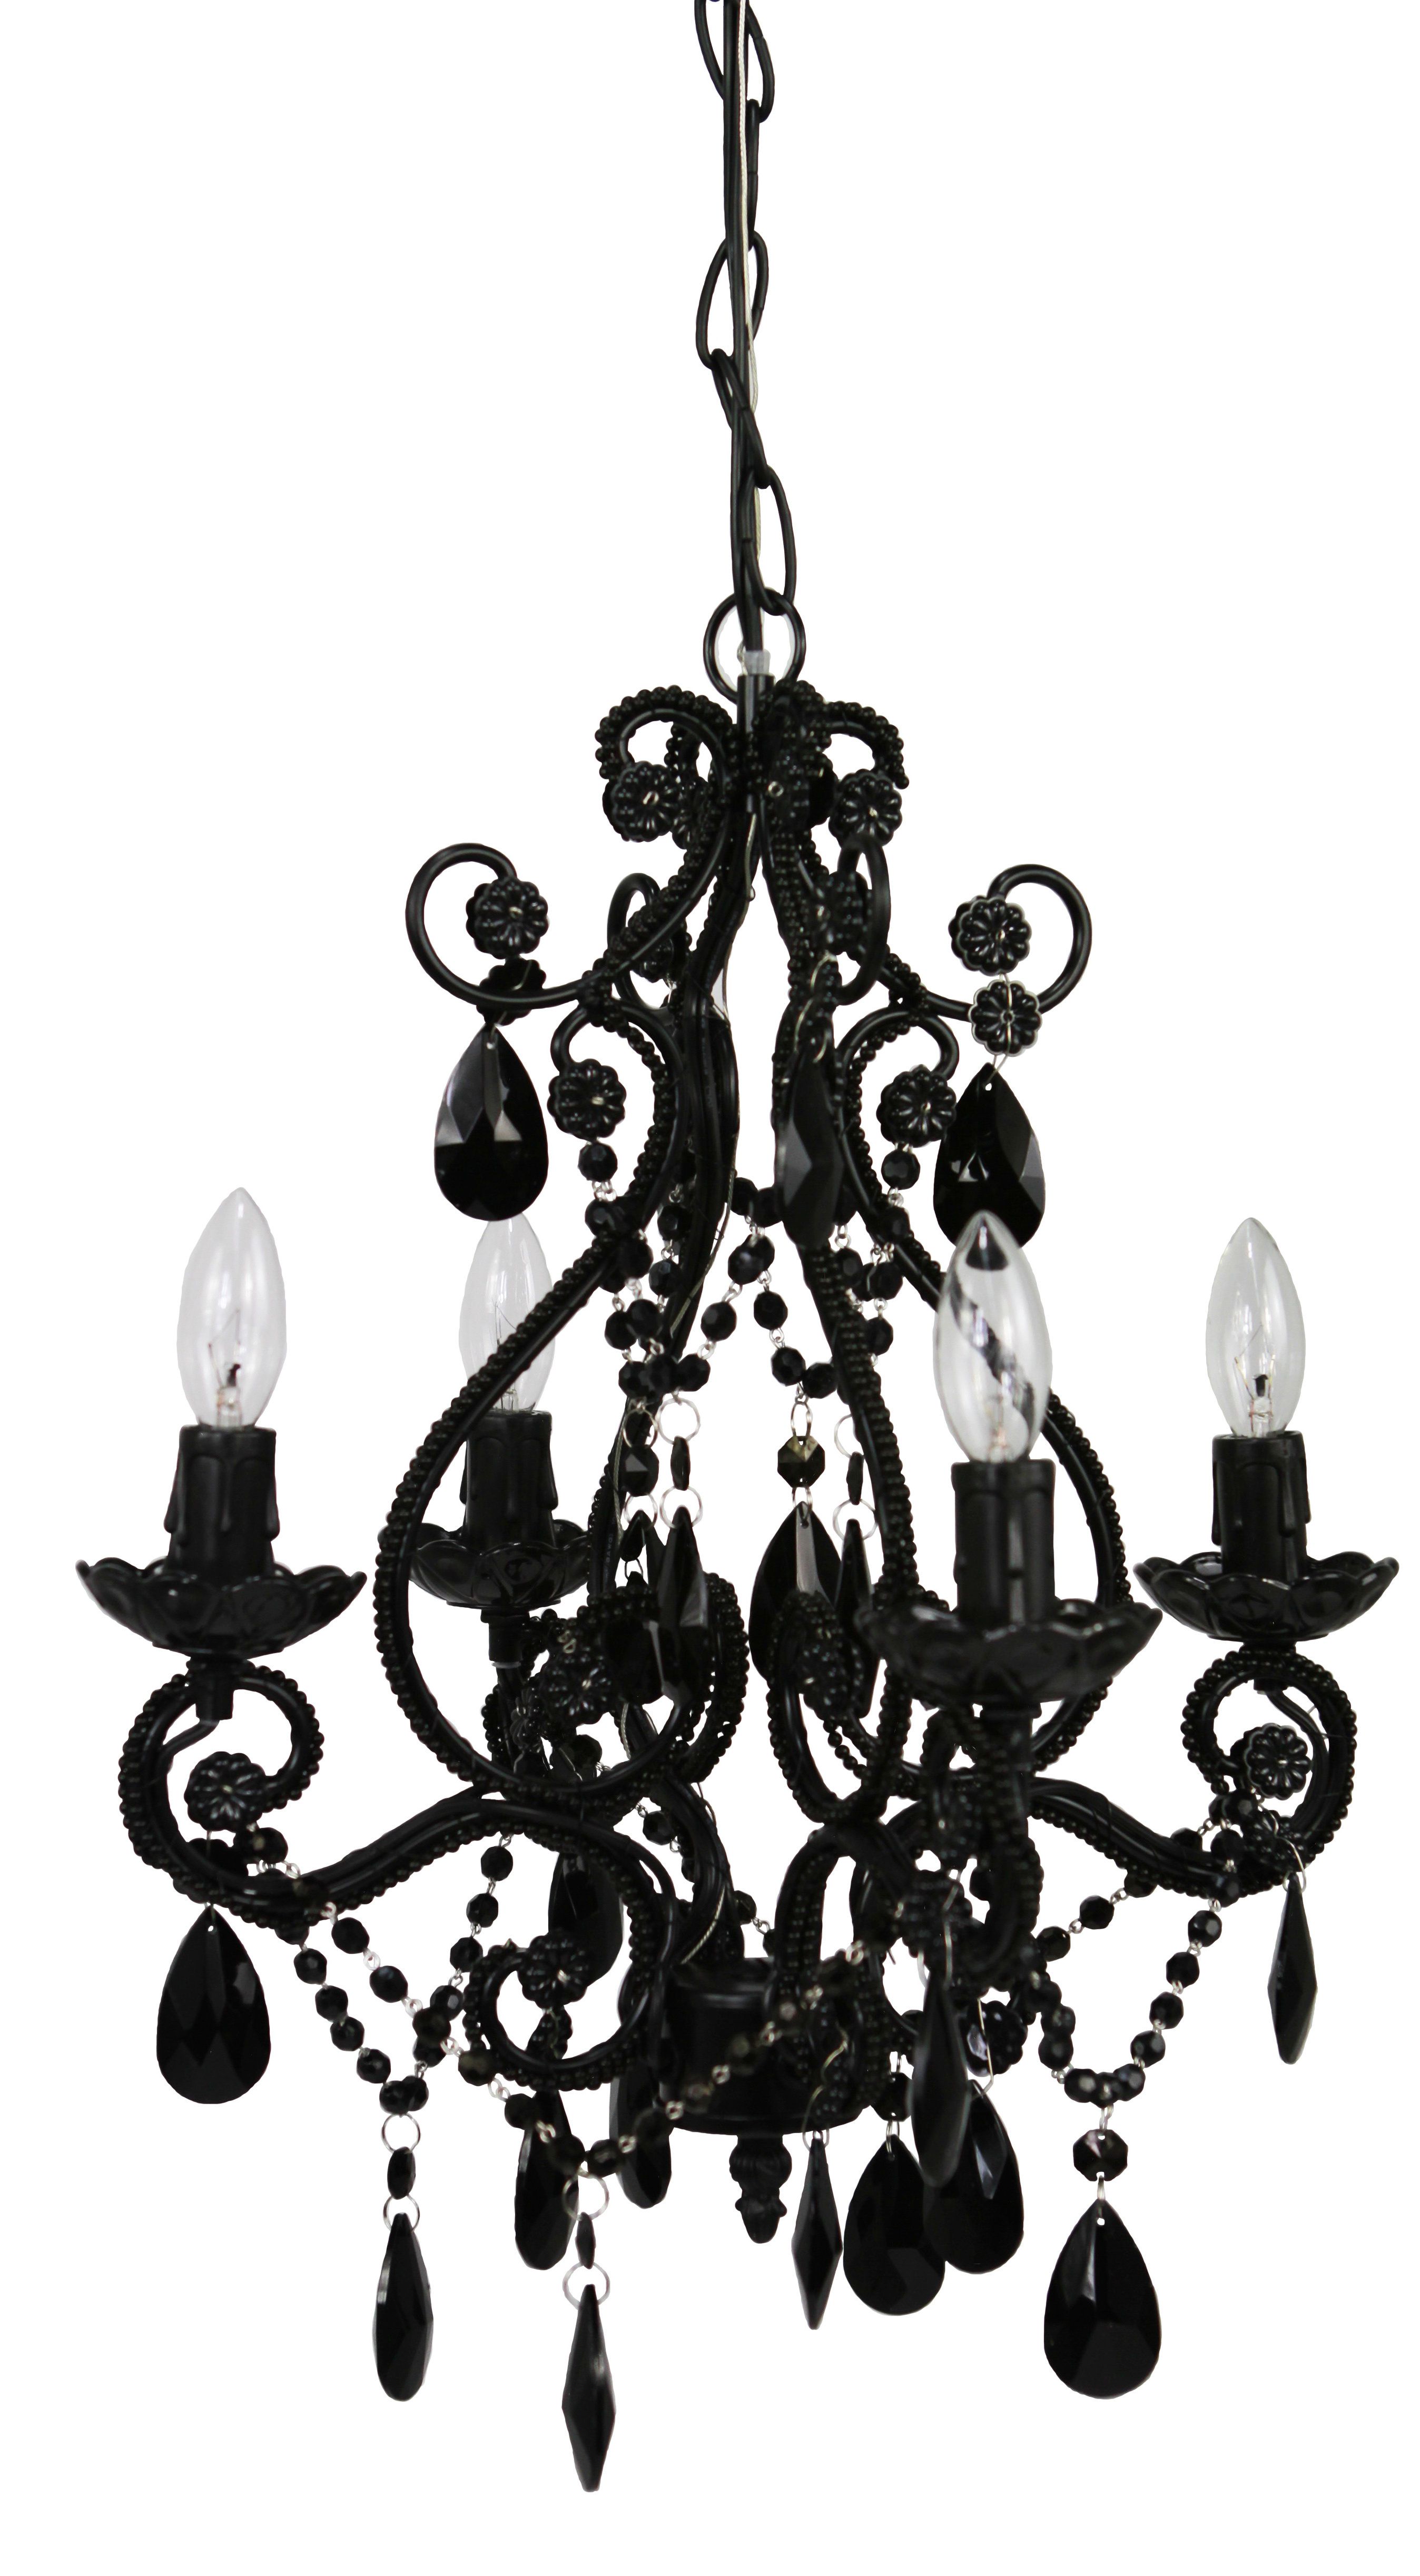 Aldora 4 Light Candle Style Chandelier Throughout Aldora 4 Light Candle Style Chandeliers (Photo 2 of 30)